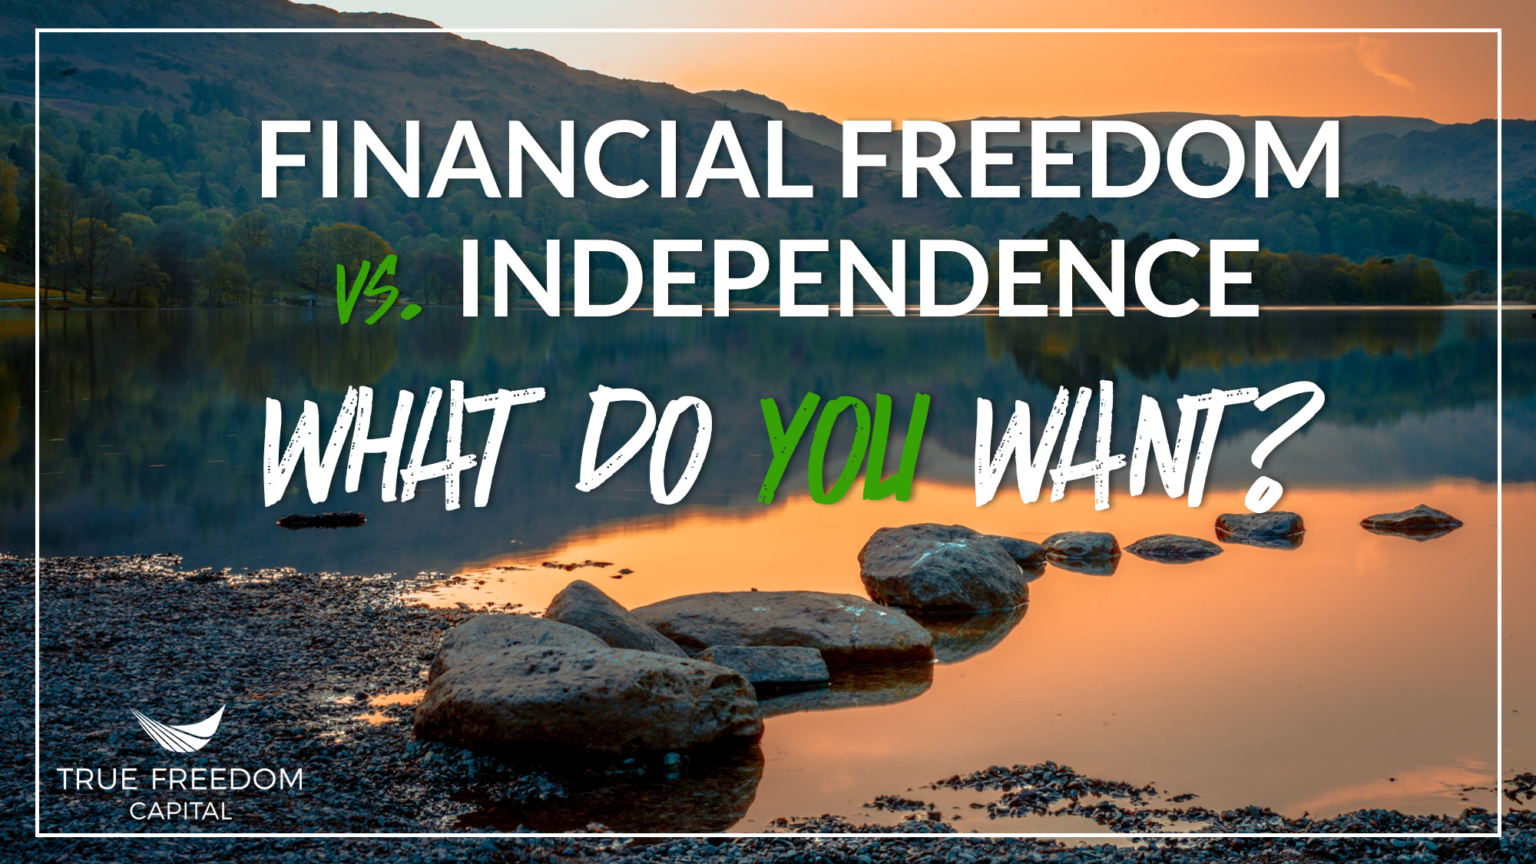 Financial Freedom vs. Independence - What Do You Want? - True Freedom